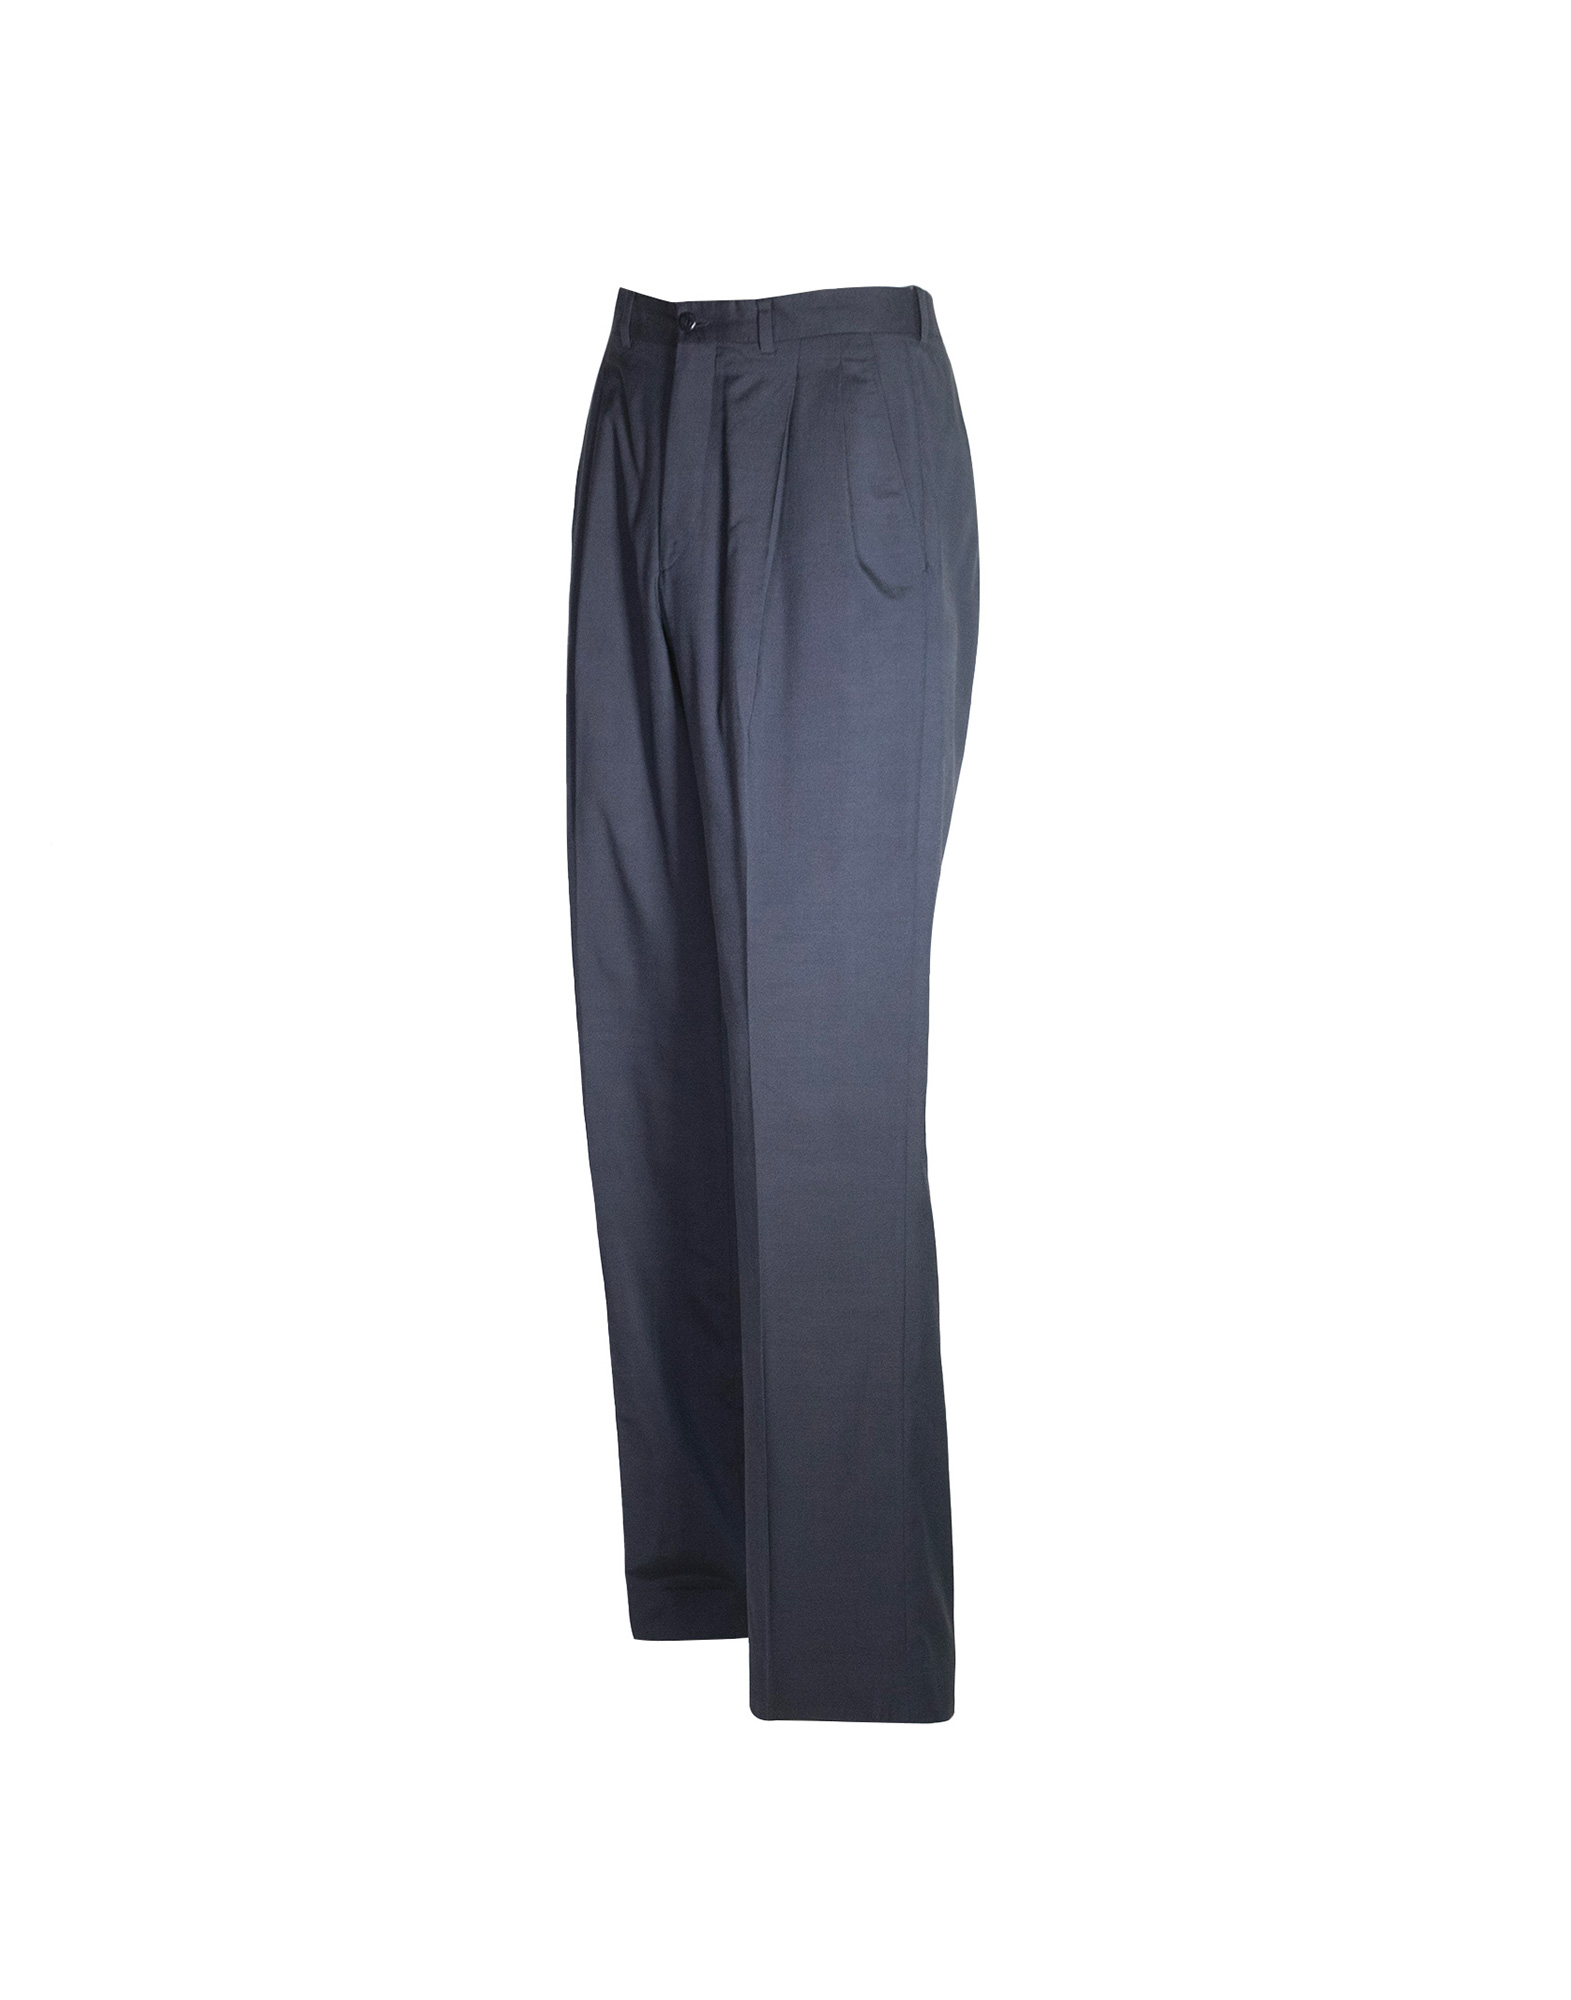 Gianni Versace - Vintage trousers with pleats